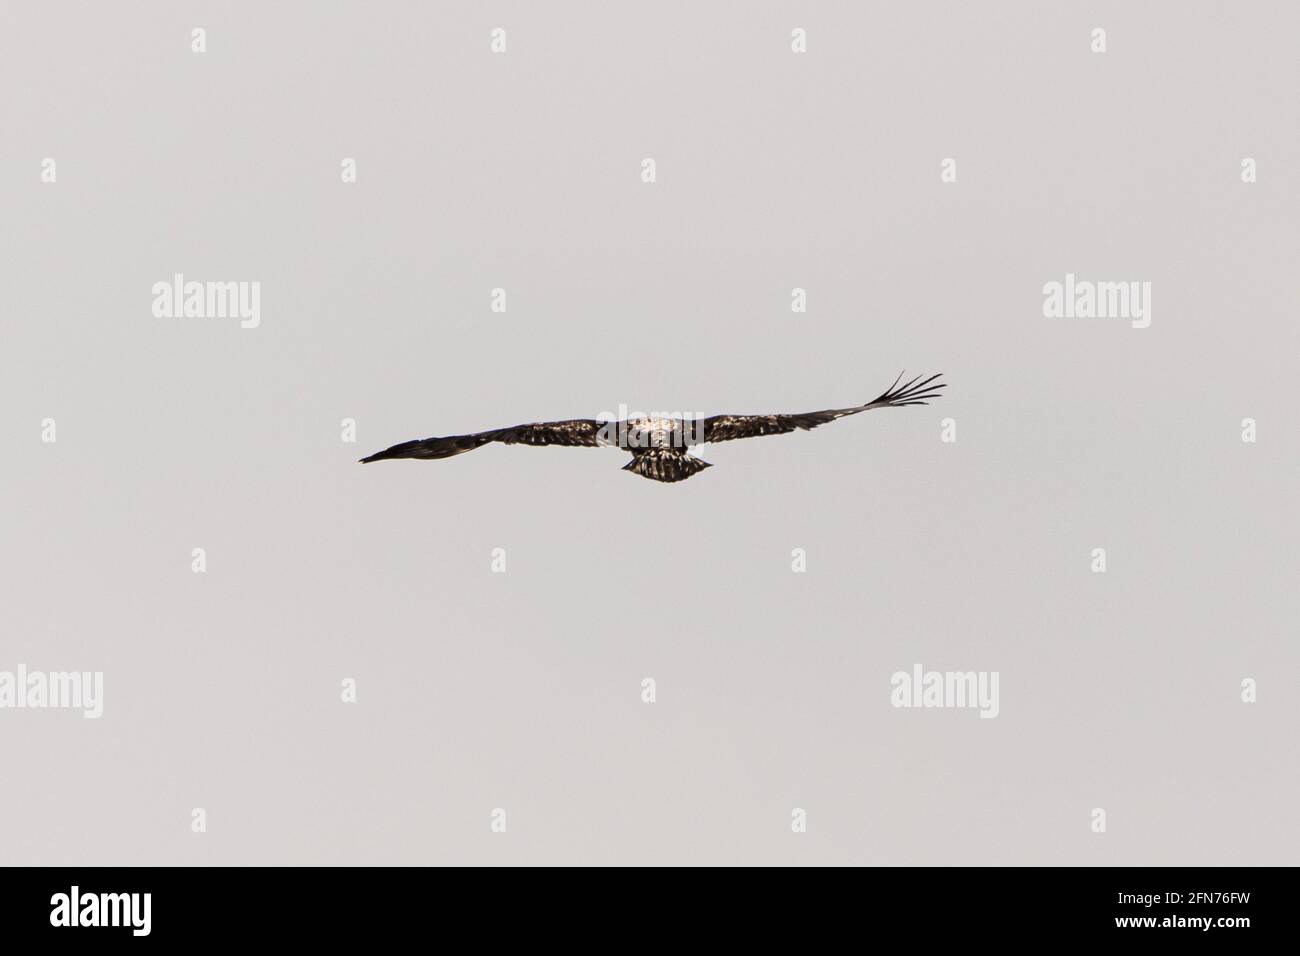 A young eaglet flying with blue sky background, bald eagle young in flight. Taken in northern Canada during spring time. Behind, back end view of bird Stock Photo